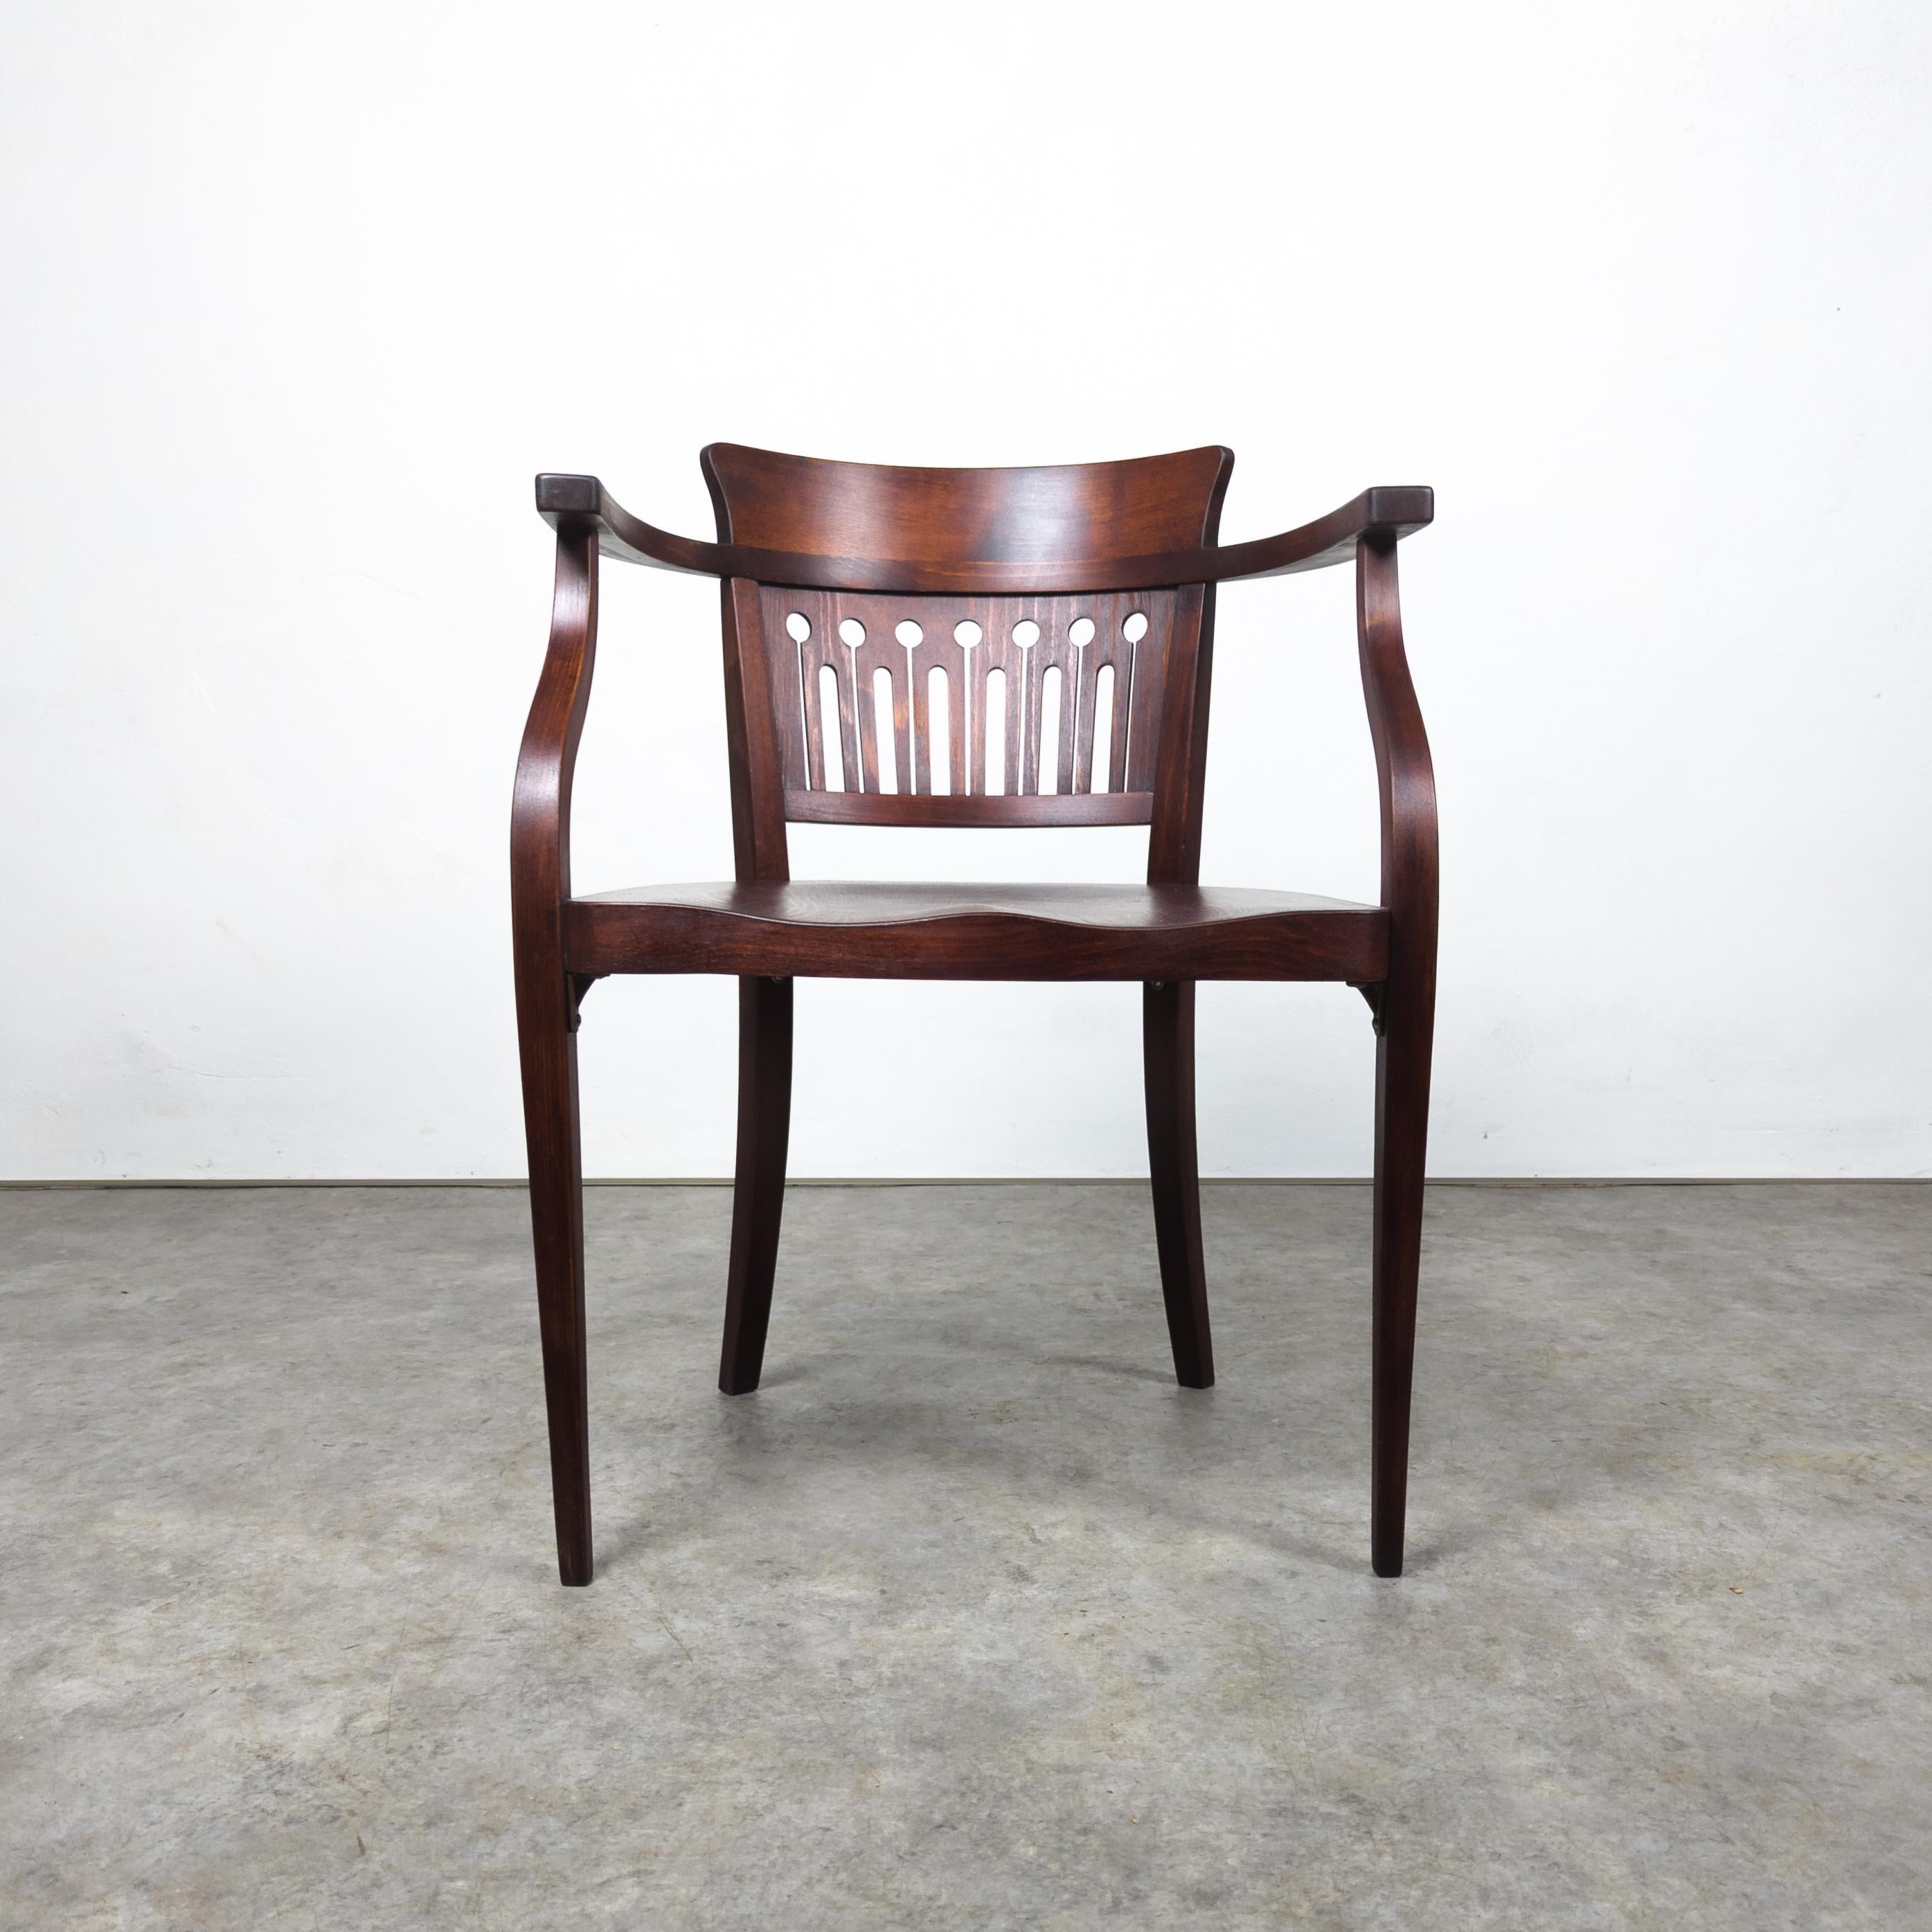 Modernist armchair from one of Vienna Secession most significant designers. Designed by Otto Wagner this chair epitomizes the elegance and functionality of Viennese Secessionist style. Featuring graceful curves and a sleek frame crafted from